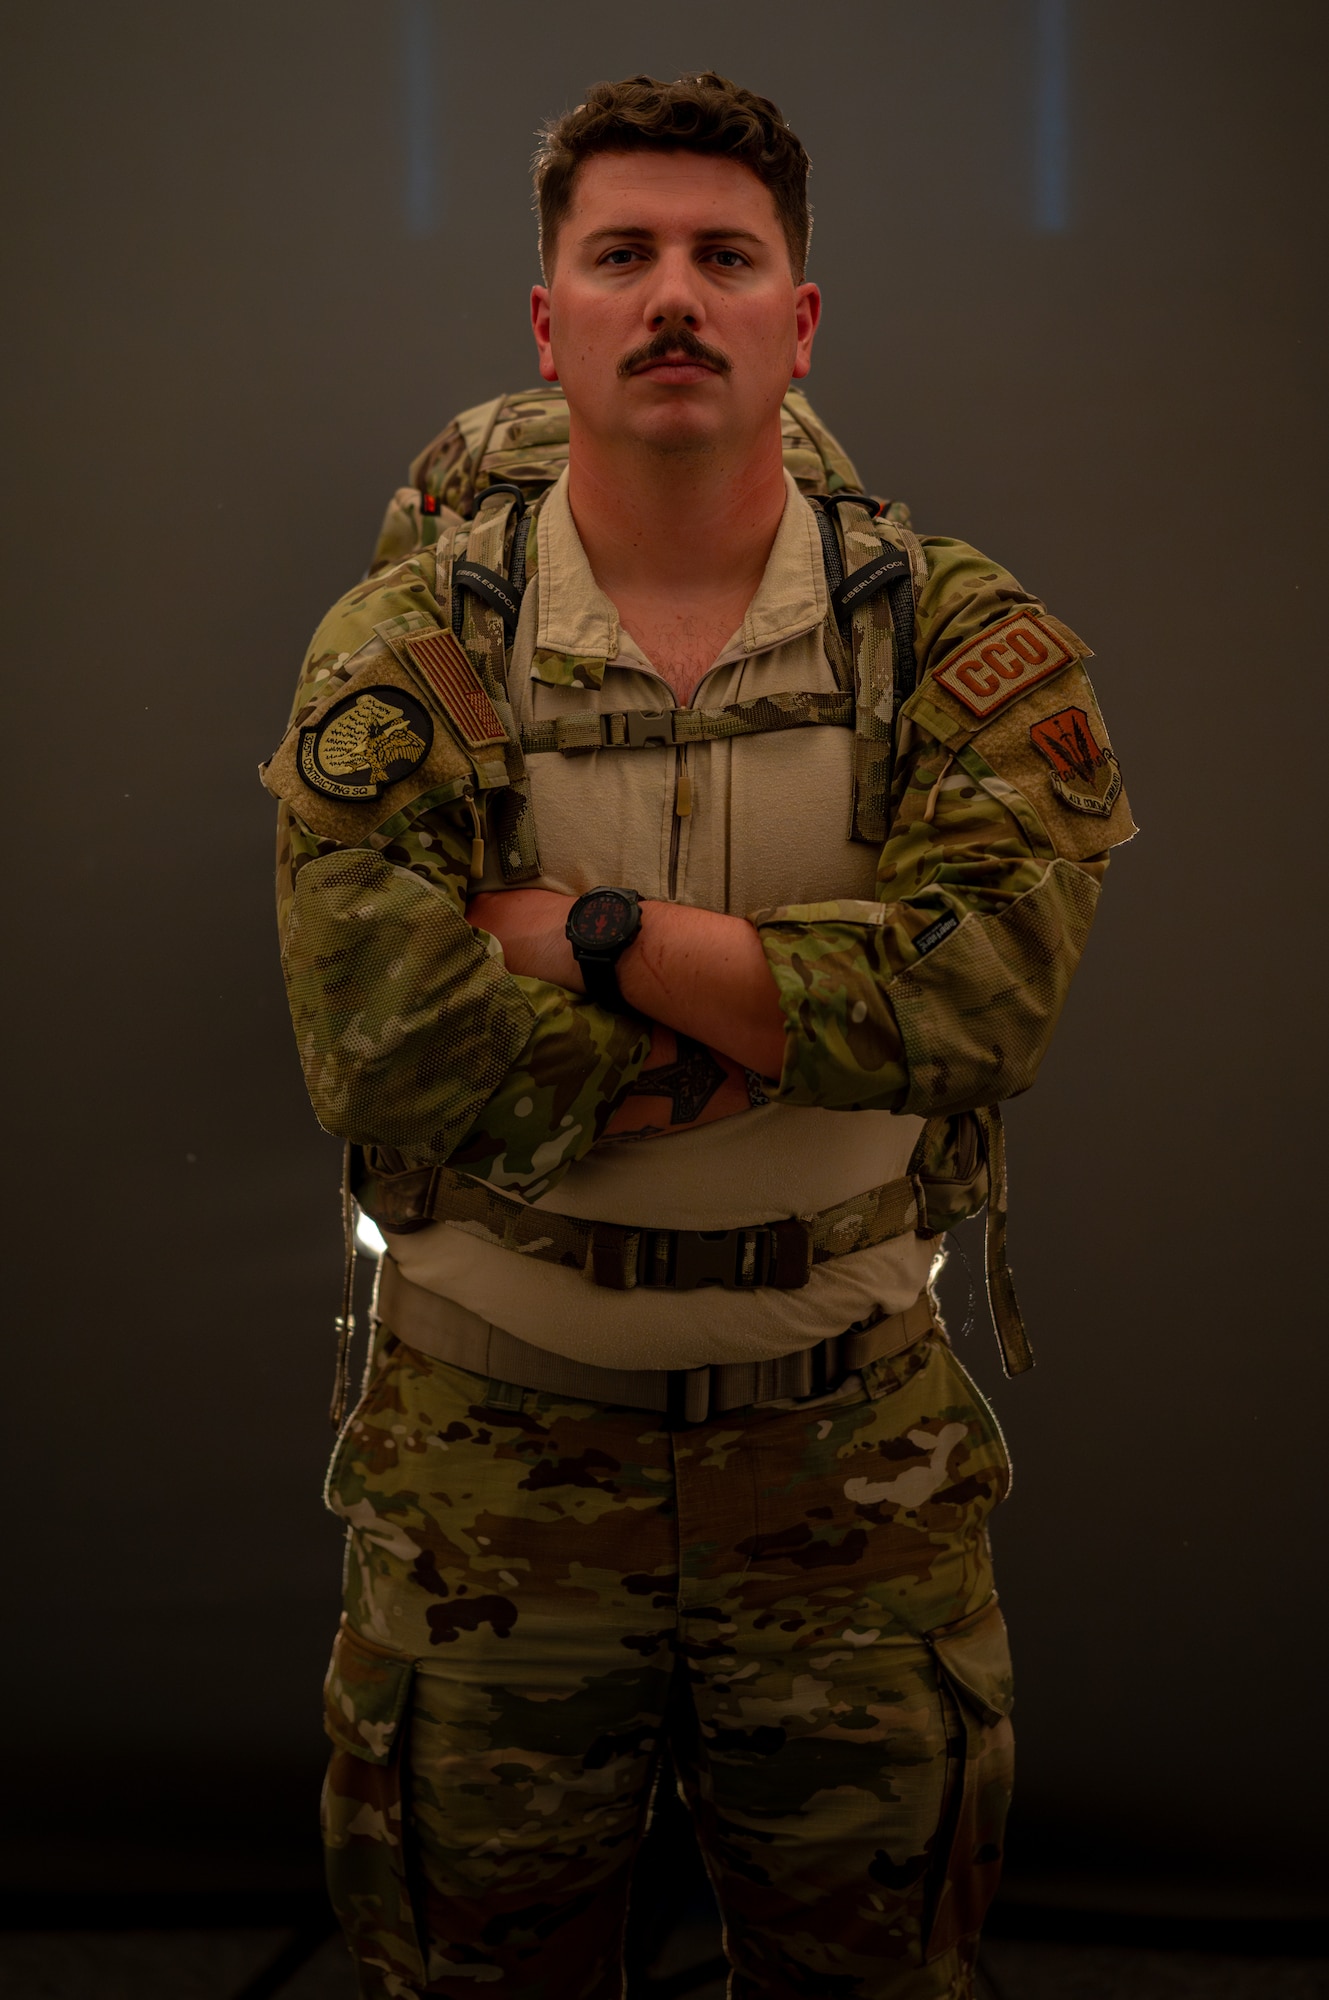 An Airman poses for a photo